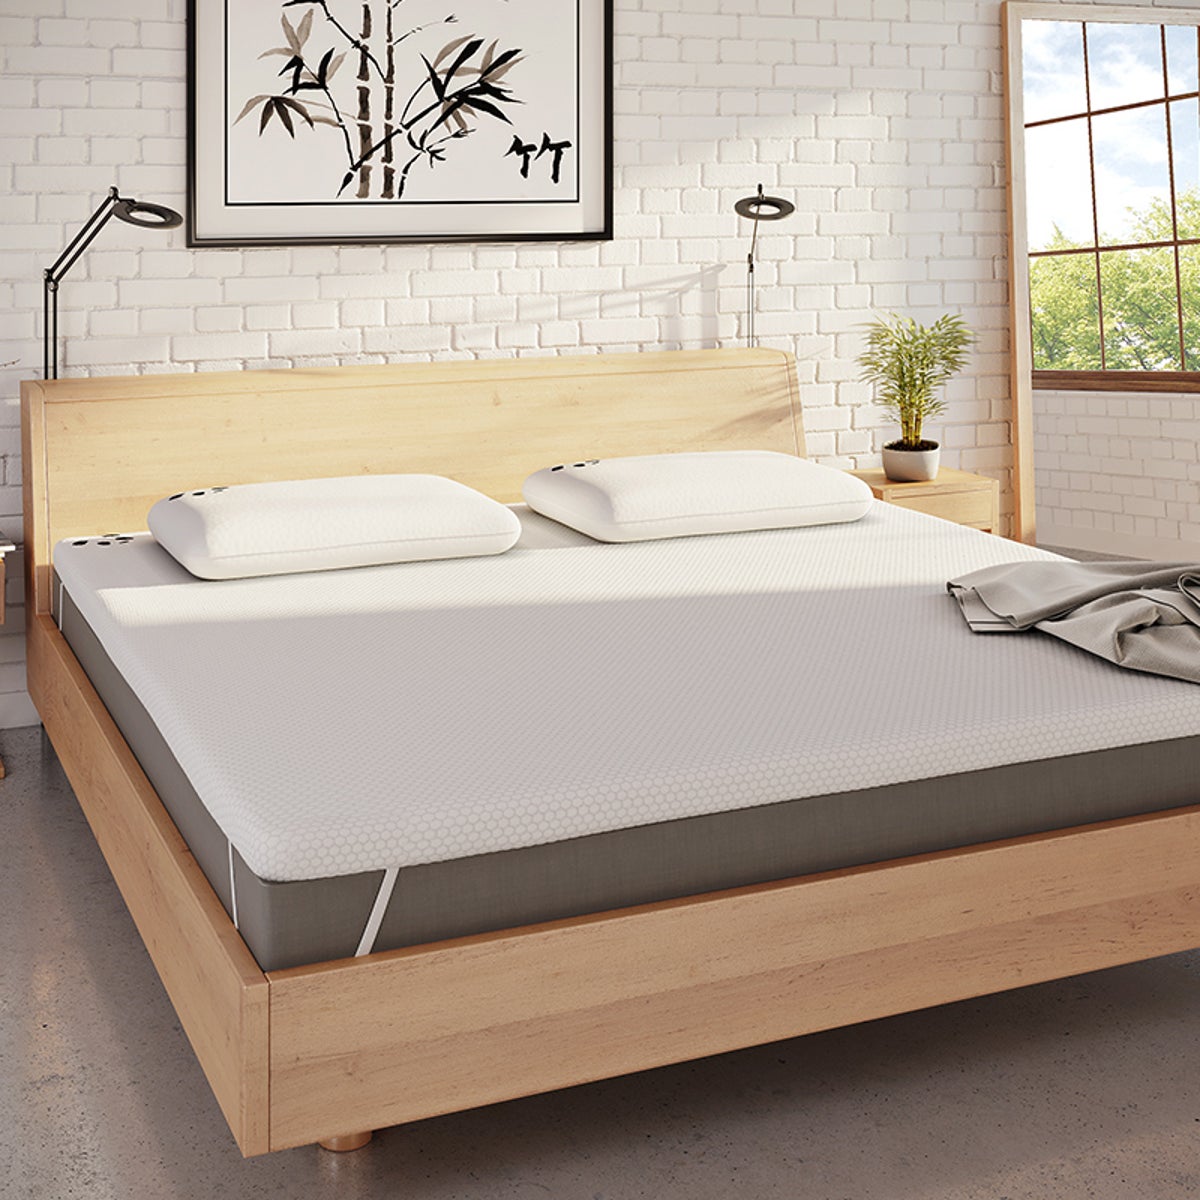 This sleep brand will help you give your bedroom a summer reset